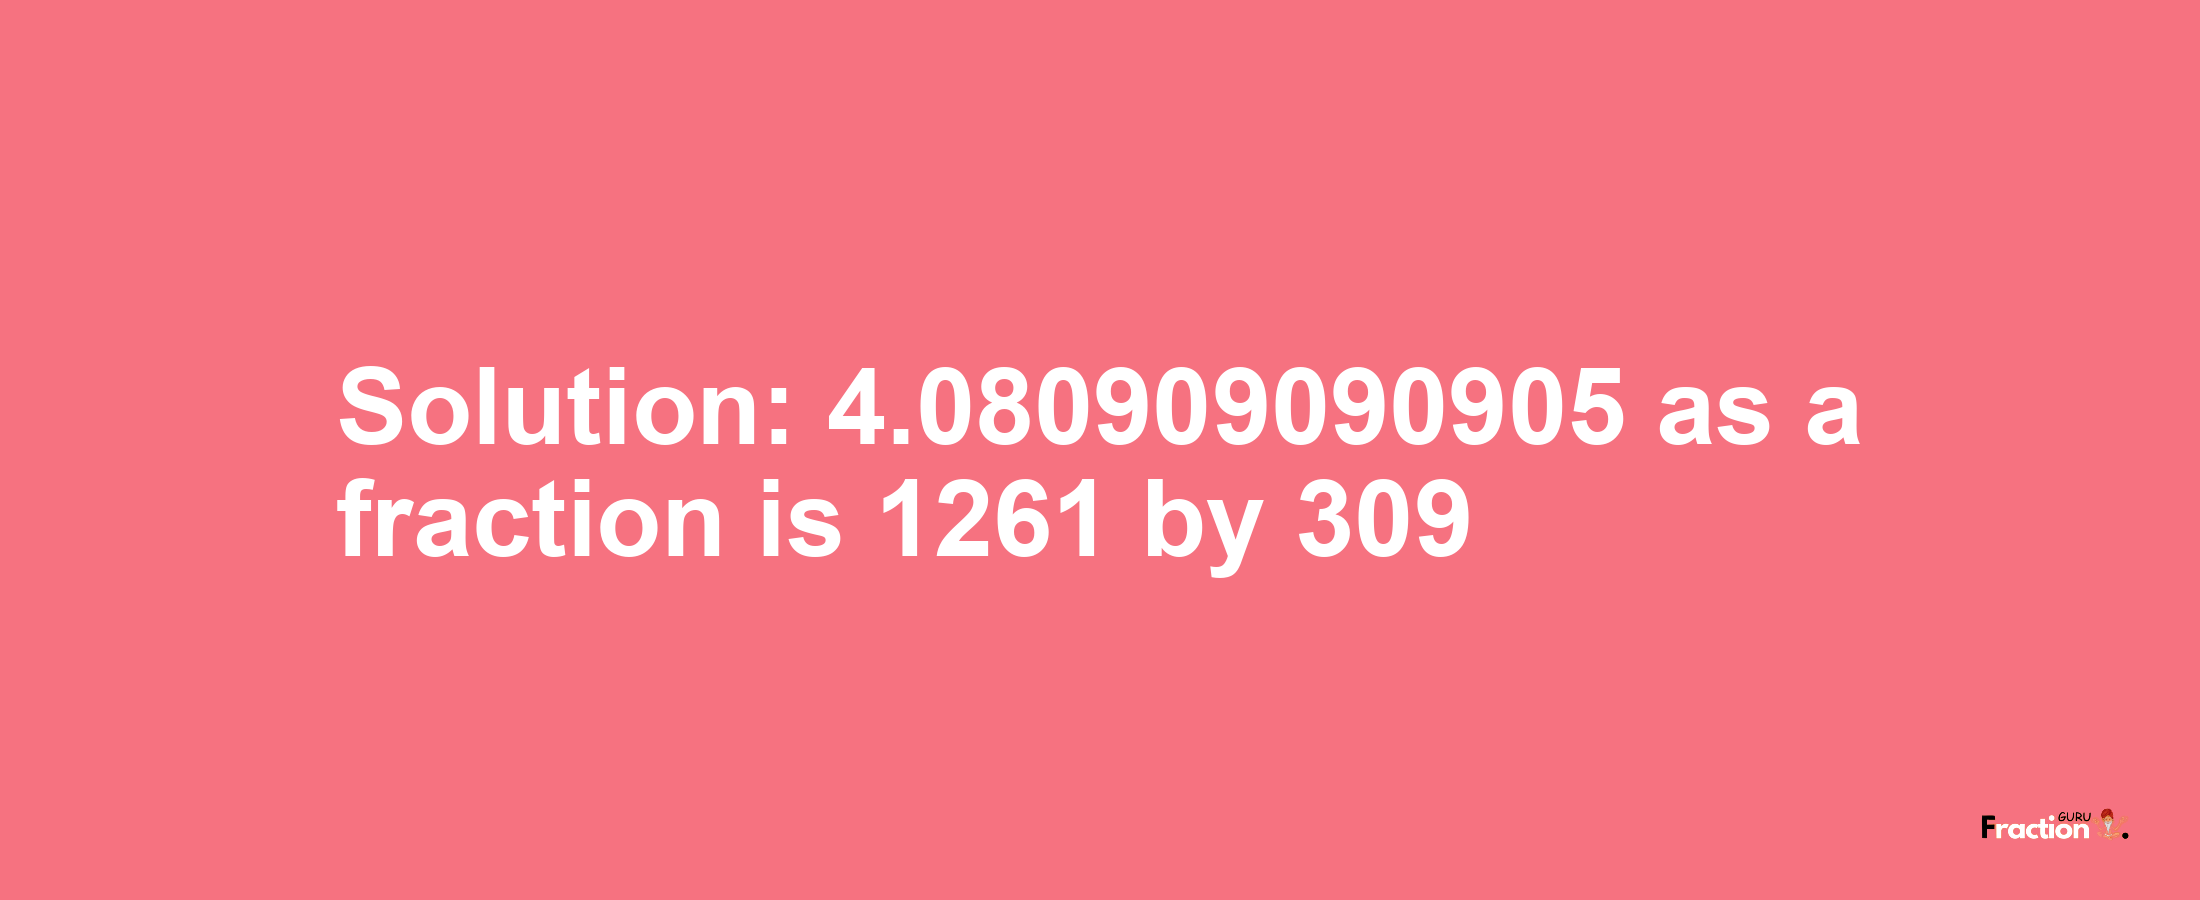 Solution:4.080909090905 as a fraction is 1261/309